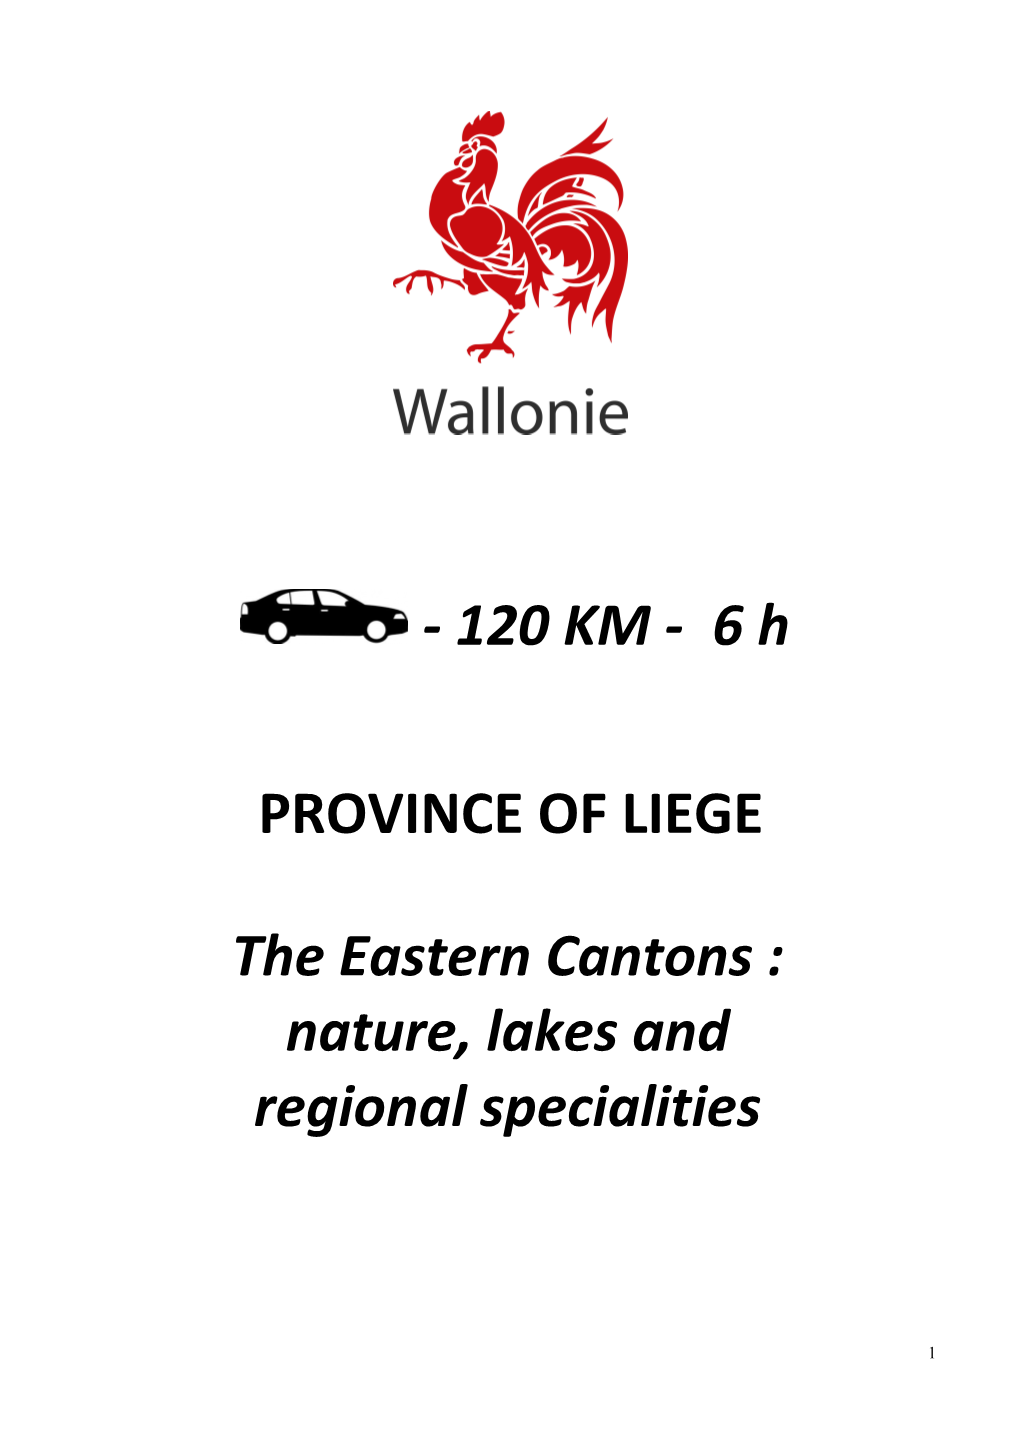 Province of Liege